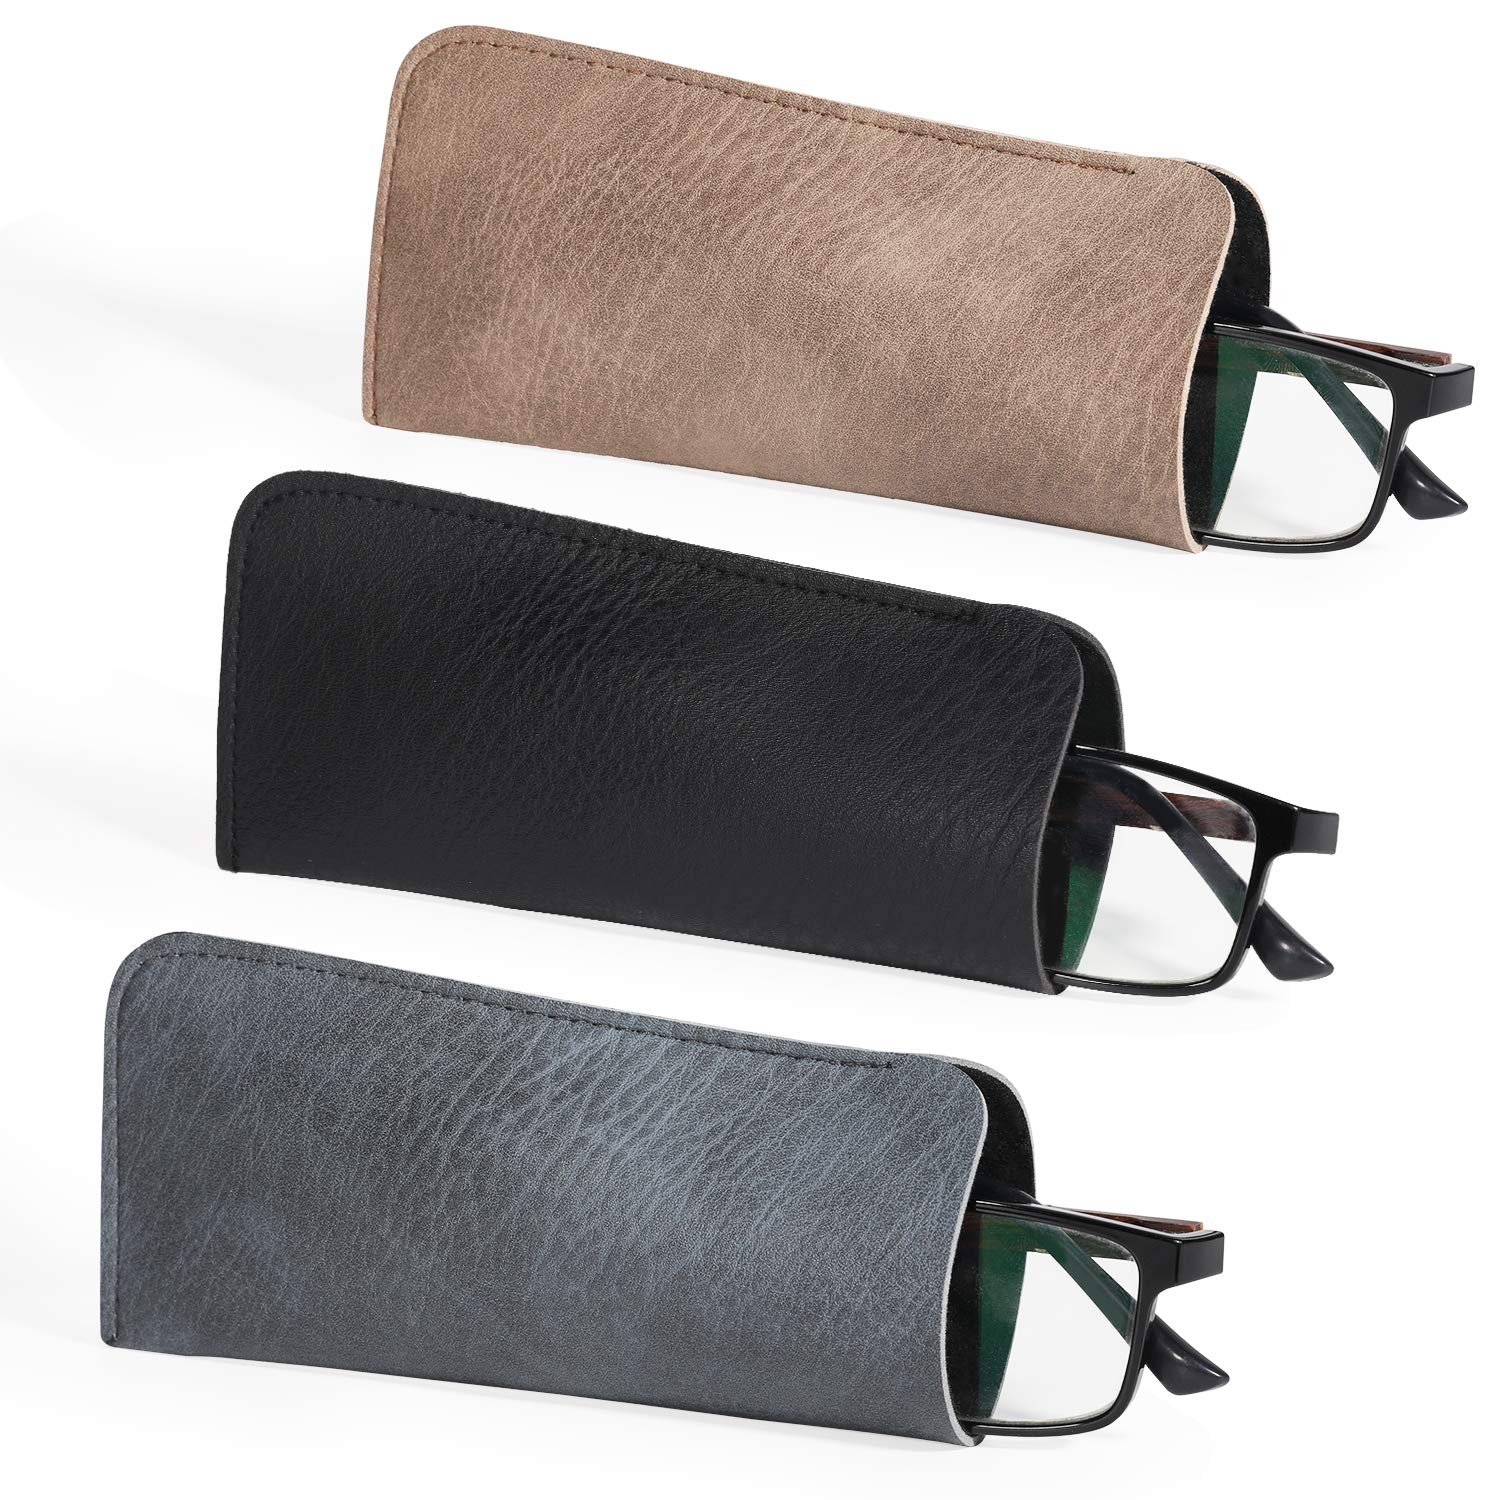 Hifot Leather Eyeglasses Case 3 Pack, PU Leather Soft Reading Glasses Pouch Spectacles Bag for Women Men Kids